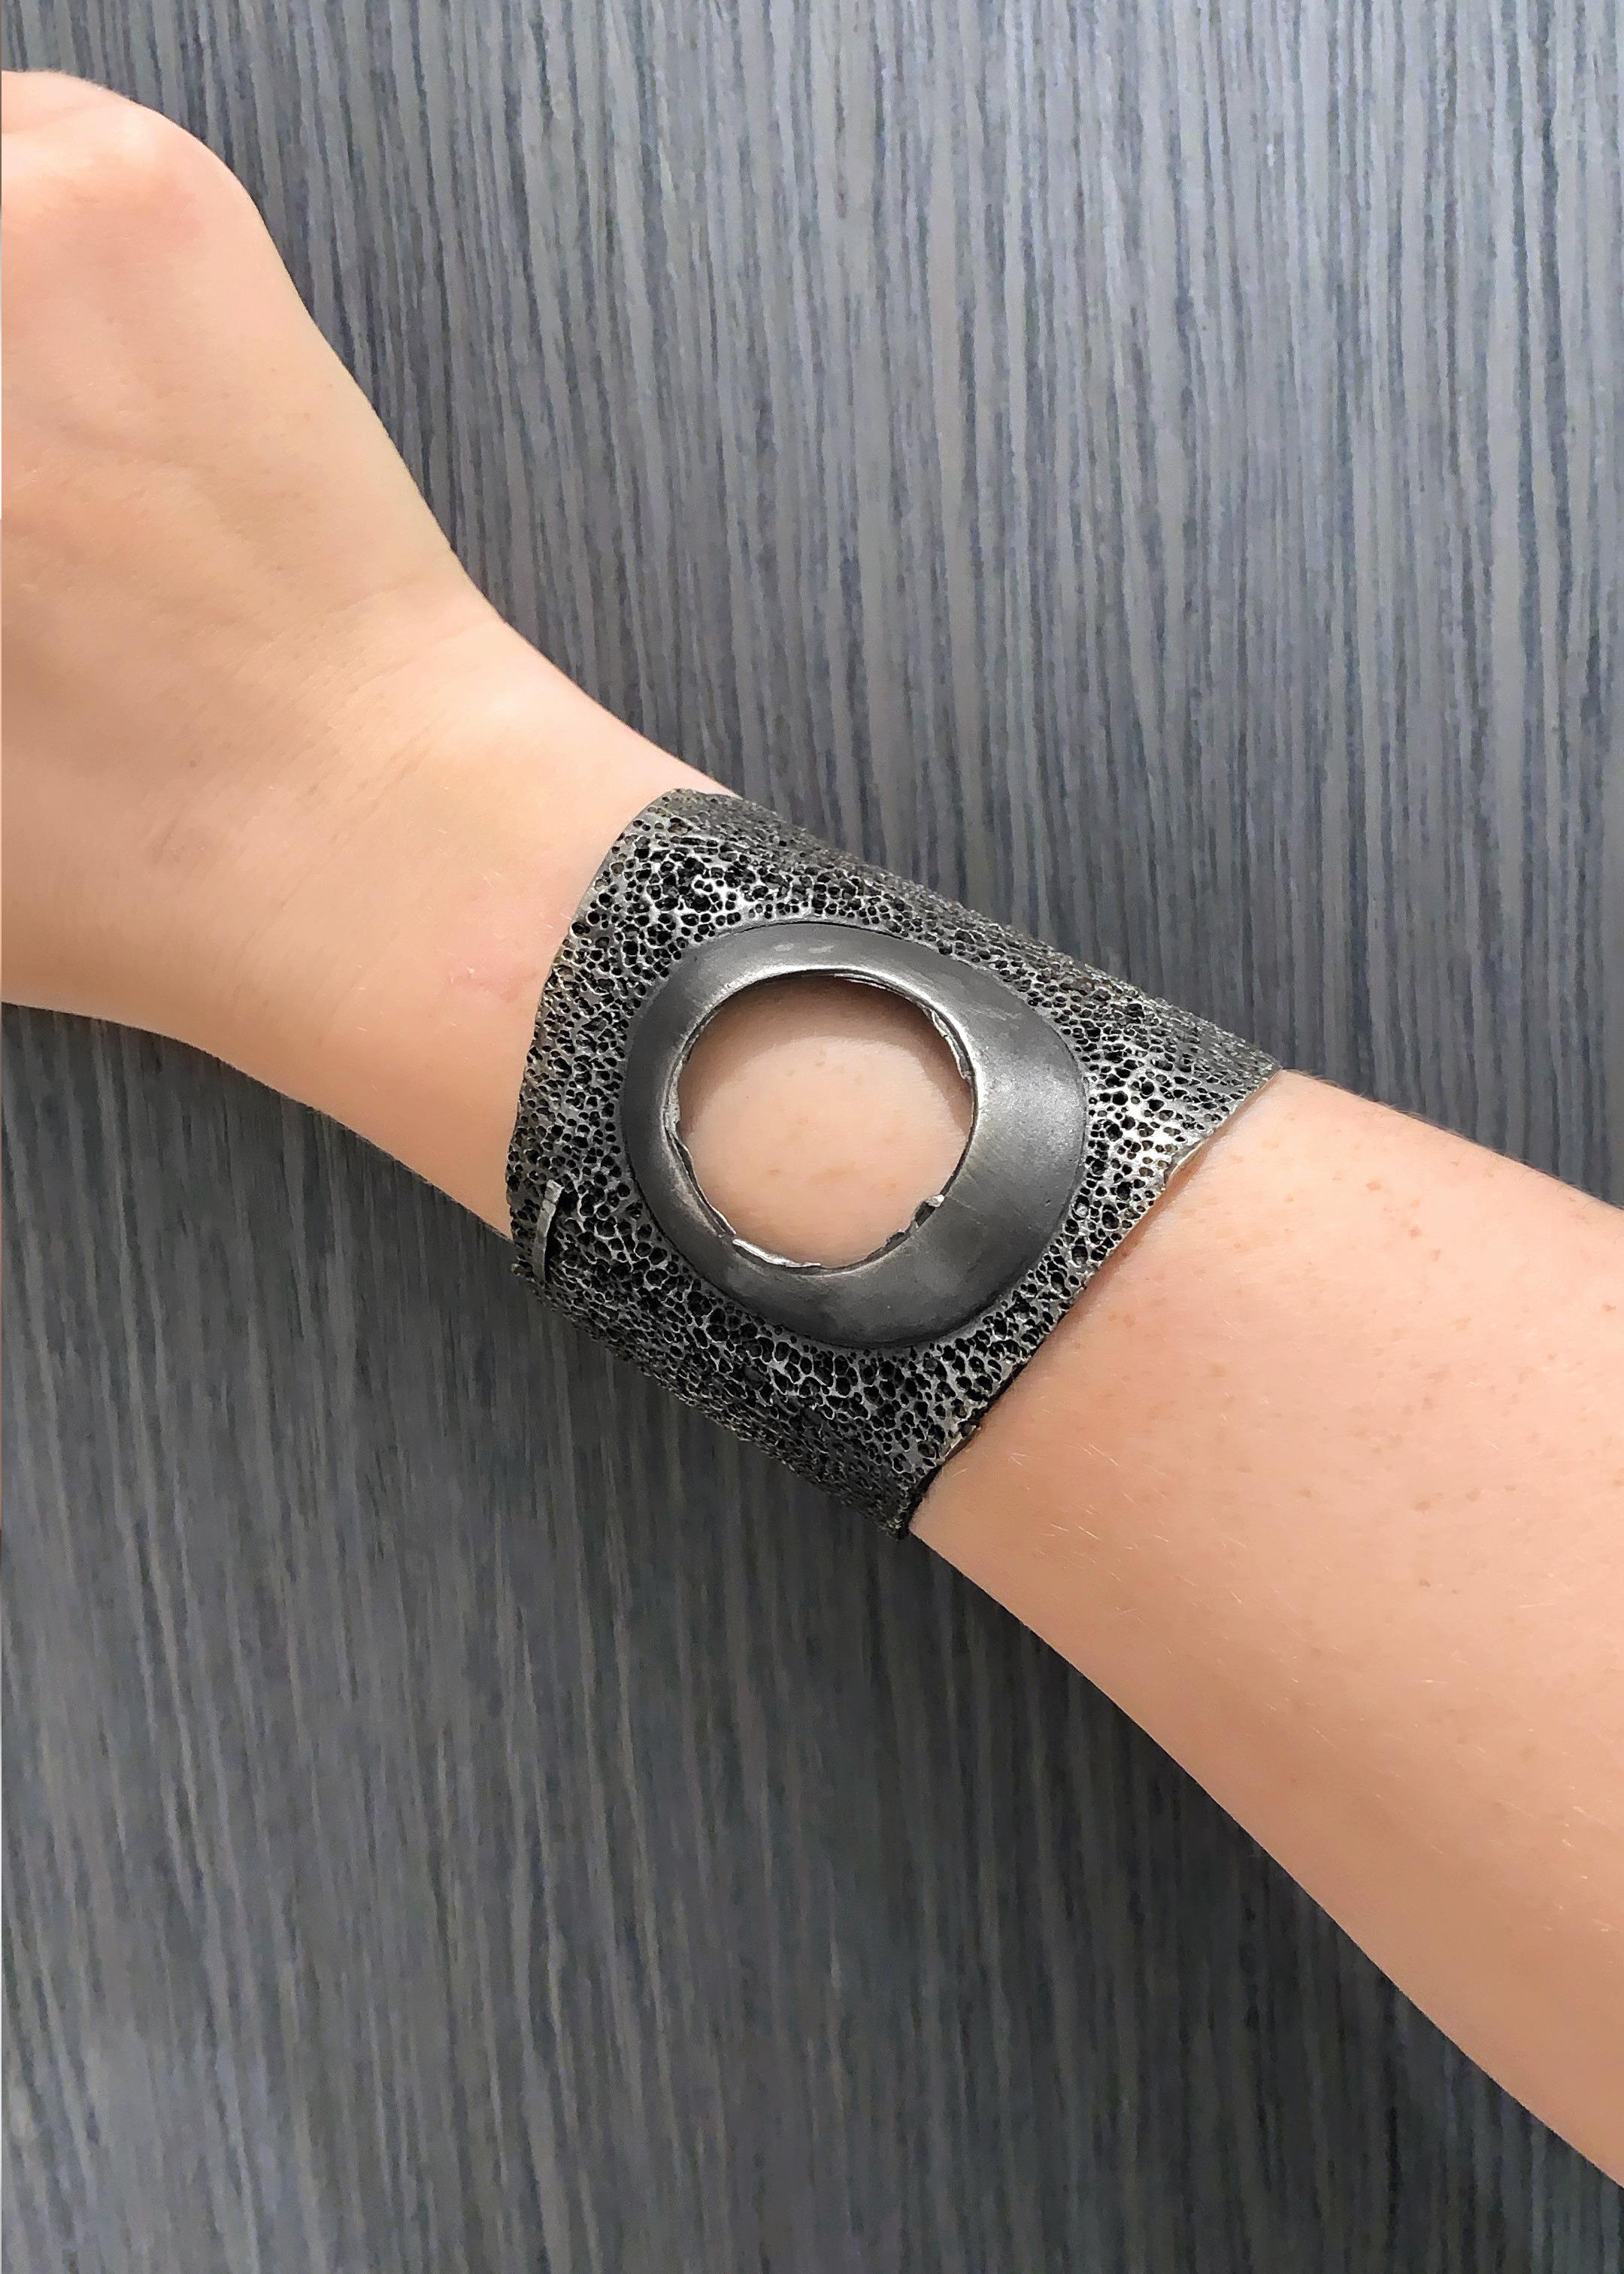 The One of a Kind Round Cut Cuff Bracelet is a wearable work of art, hand-fabricated by master metalsmith Darcy Miro in intricately textured oxidized sterling silver. Signed Darcy Miro 2008.

About the Maker - Darcy Miro, based out of Brooklyn, New